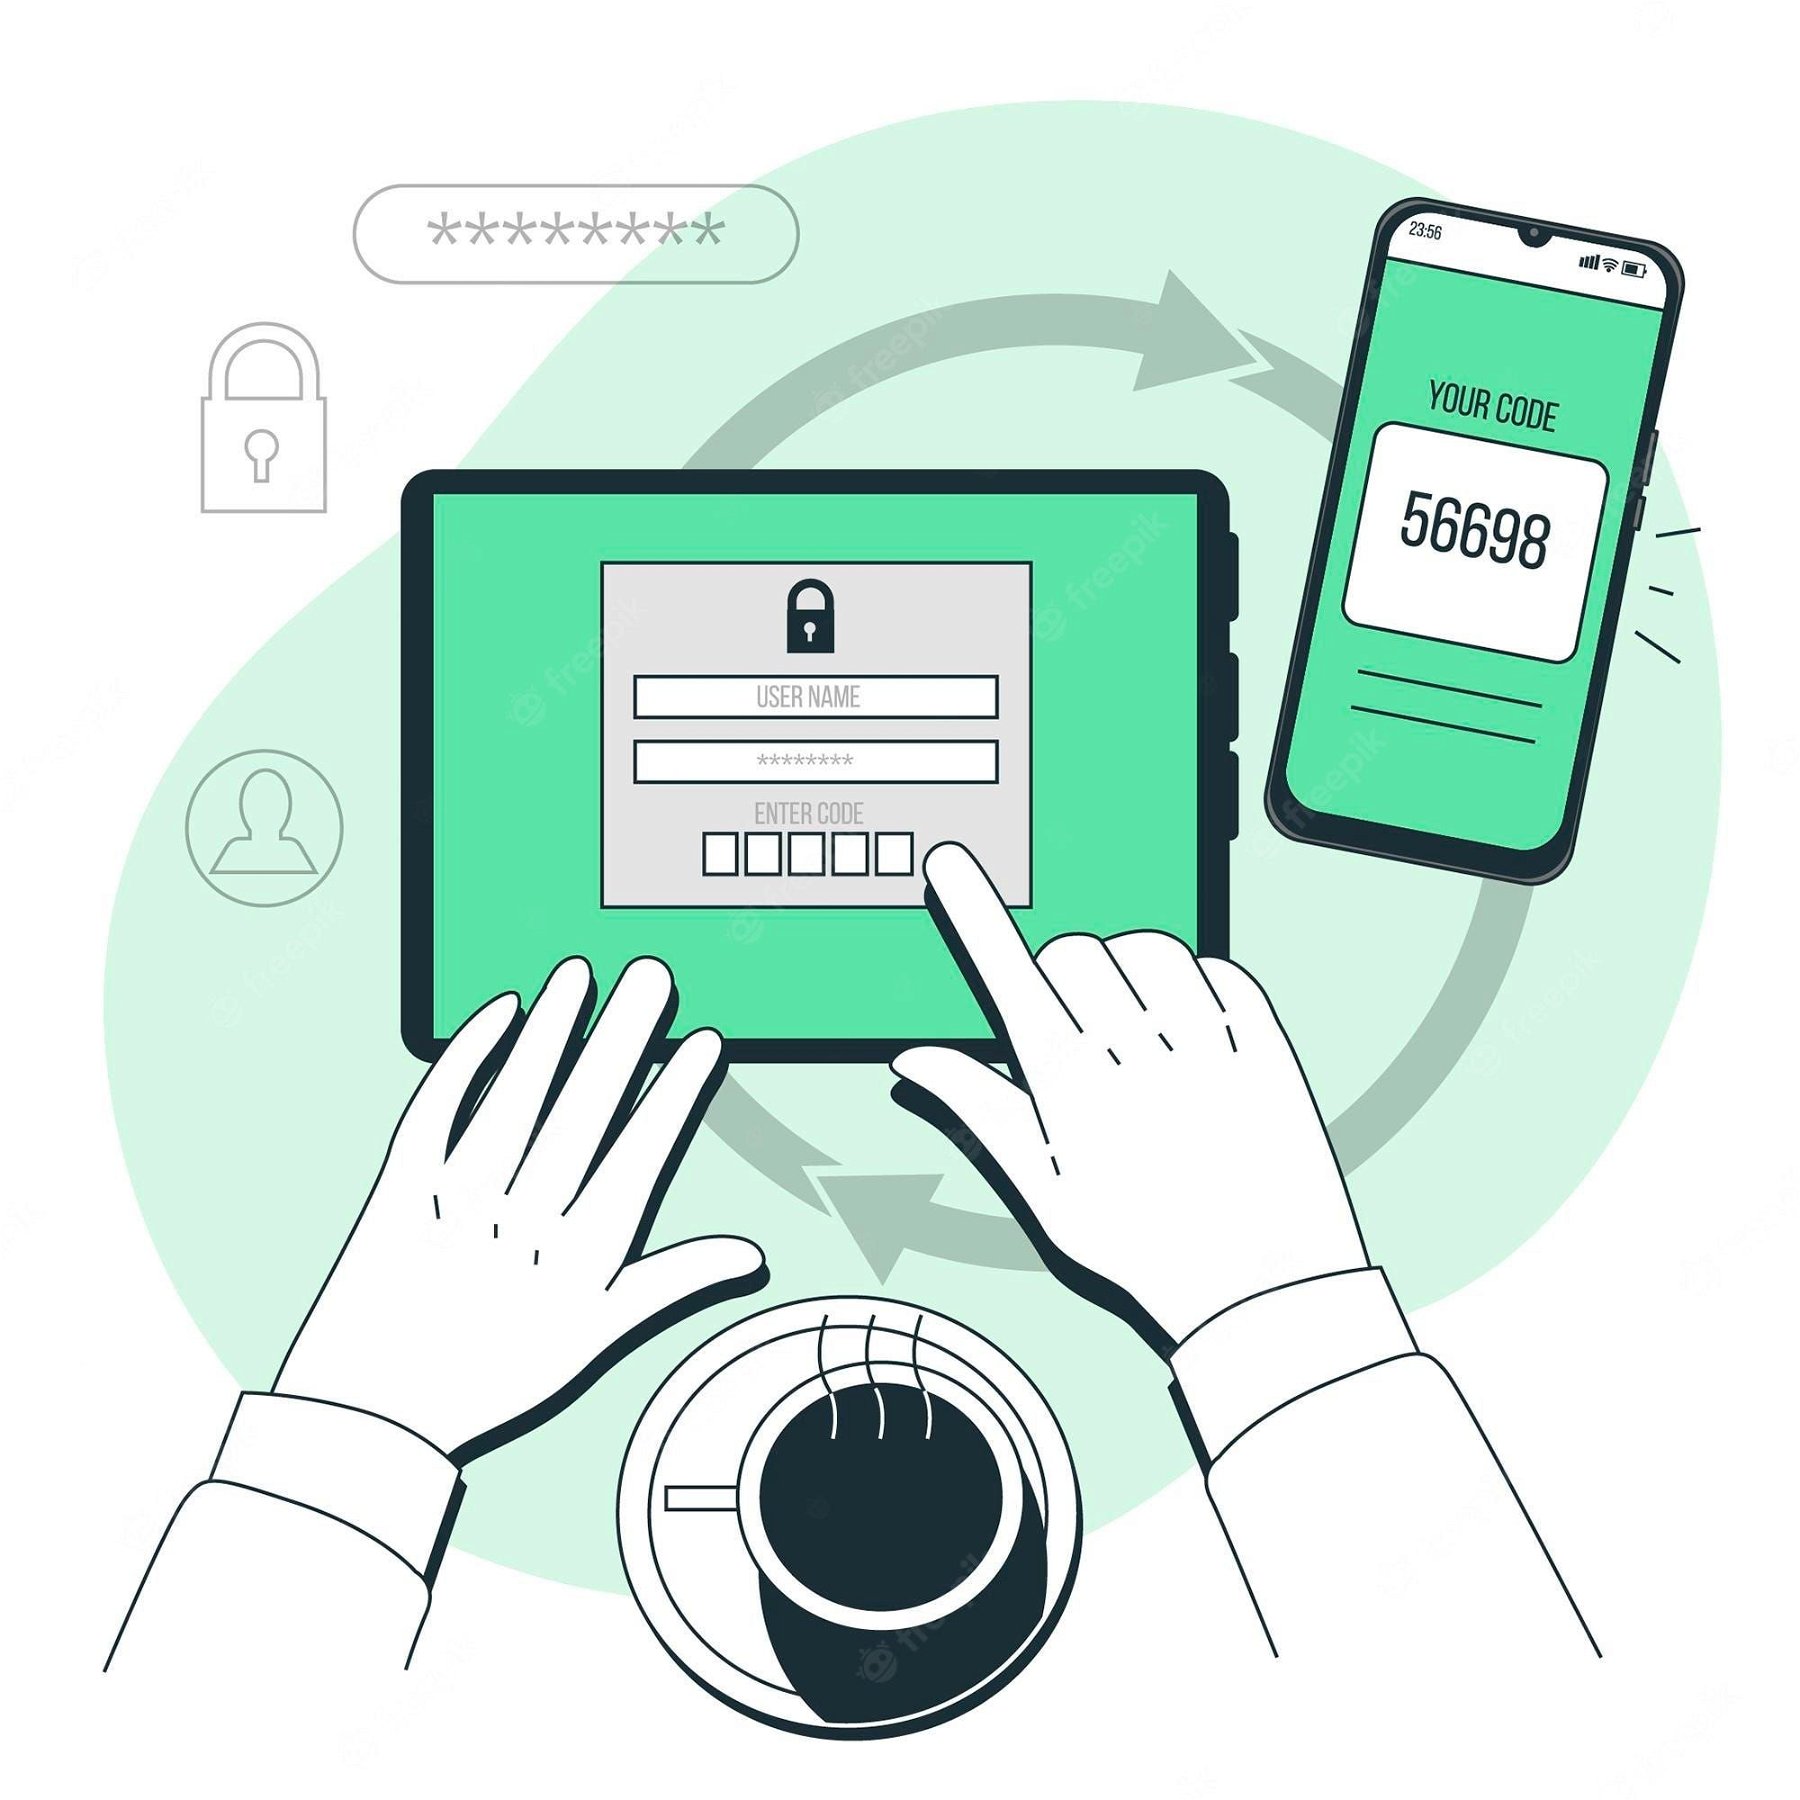 How to Enable Two-Factor Authentication for Your SaaS Products? A 5-Step Guide